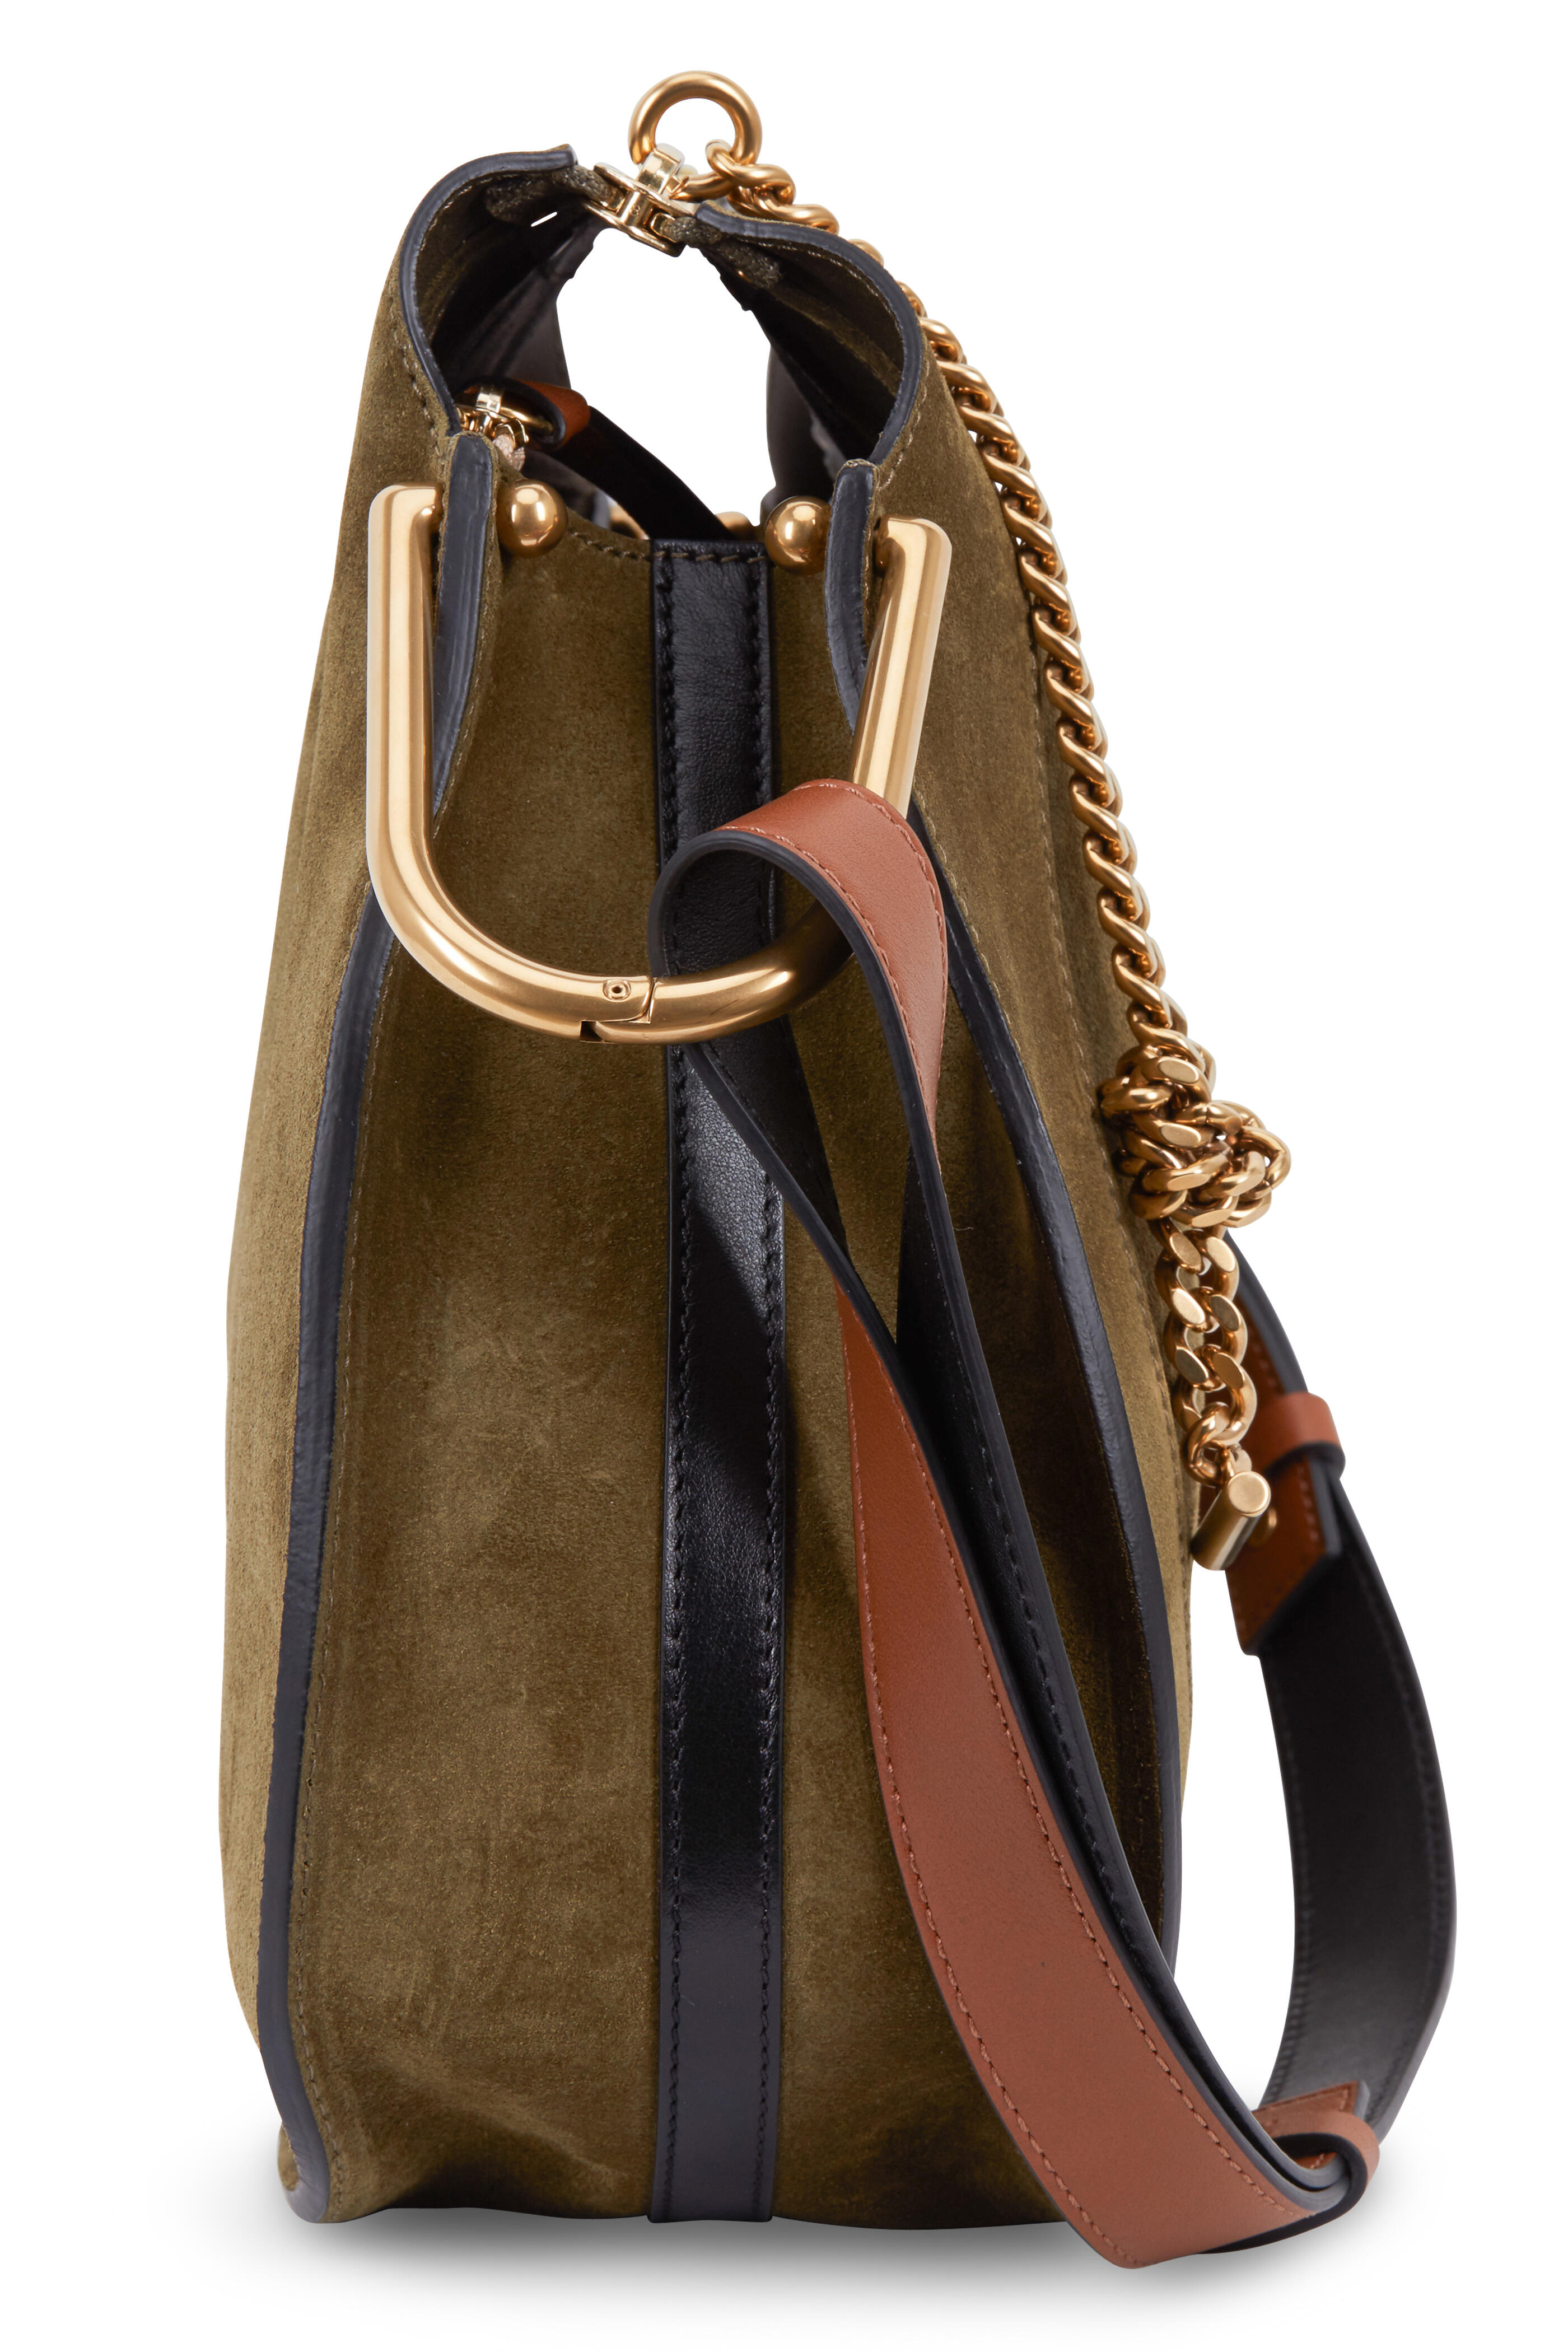 Cleo CONVERTIBLE BACKPACK, leather backpack, made of italian Suede